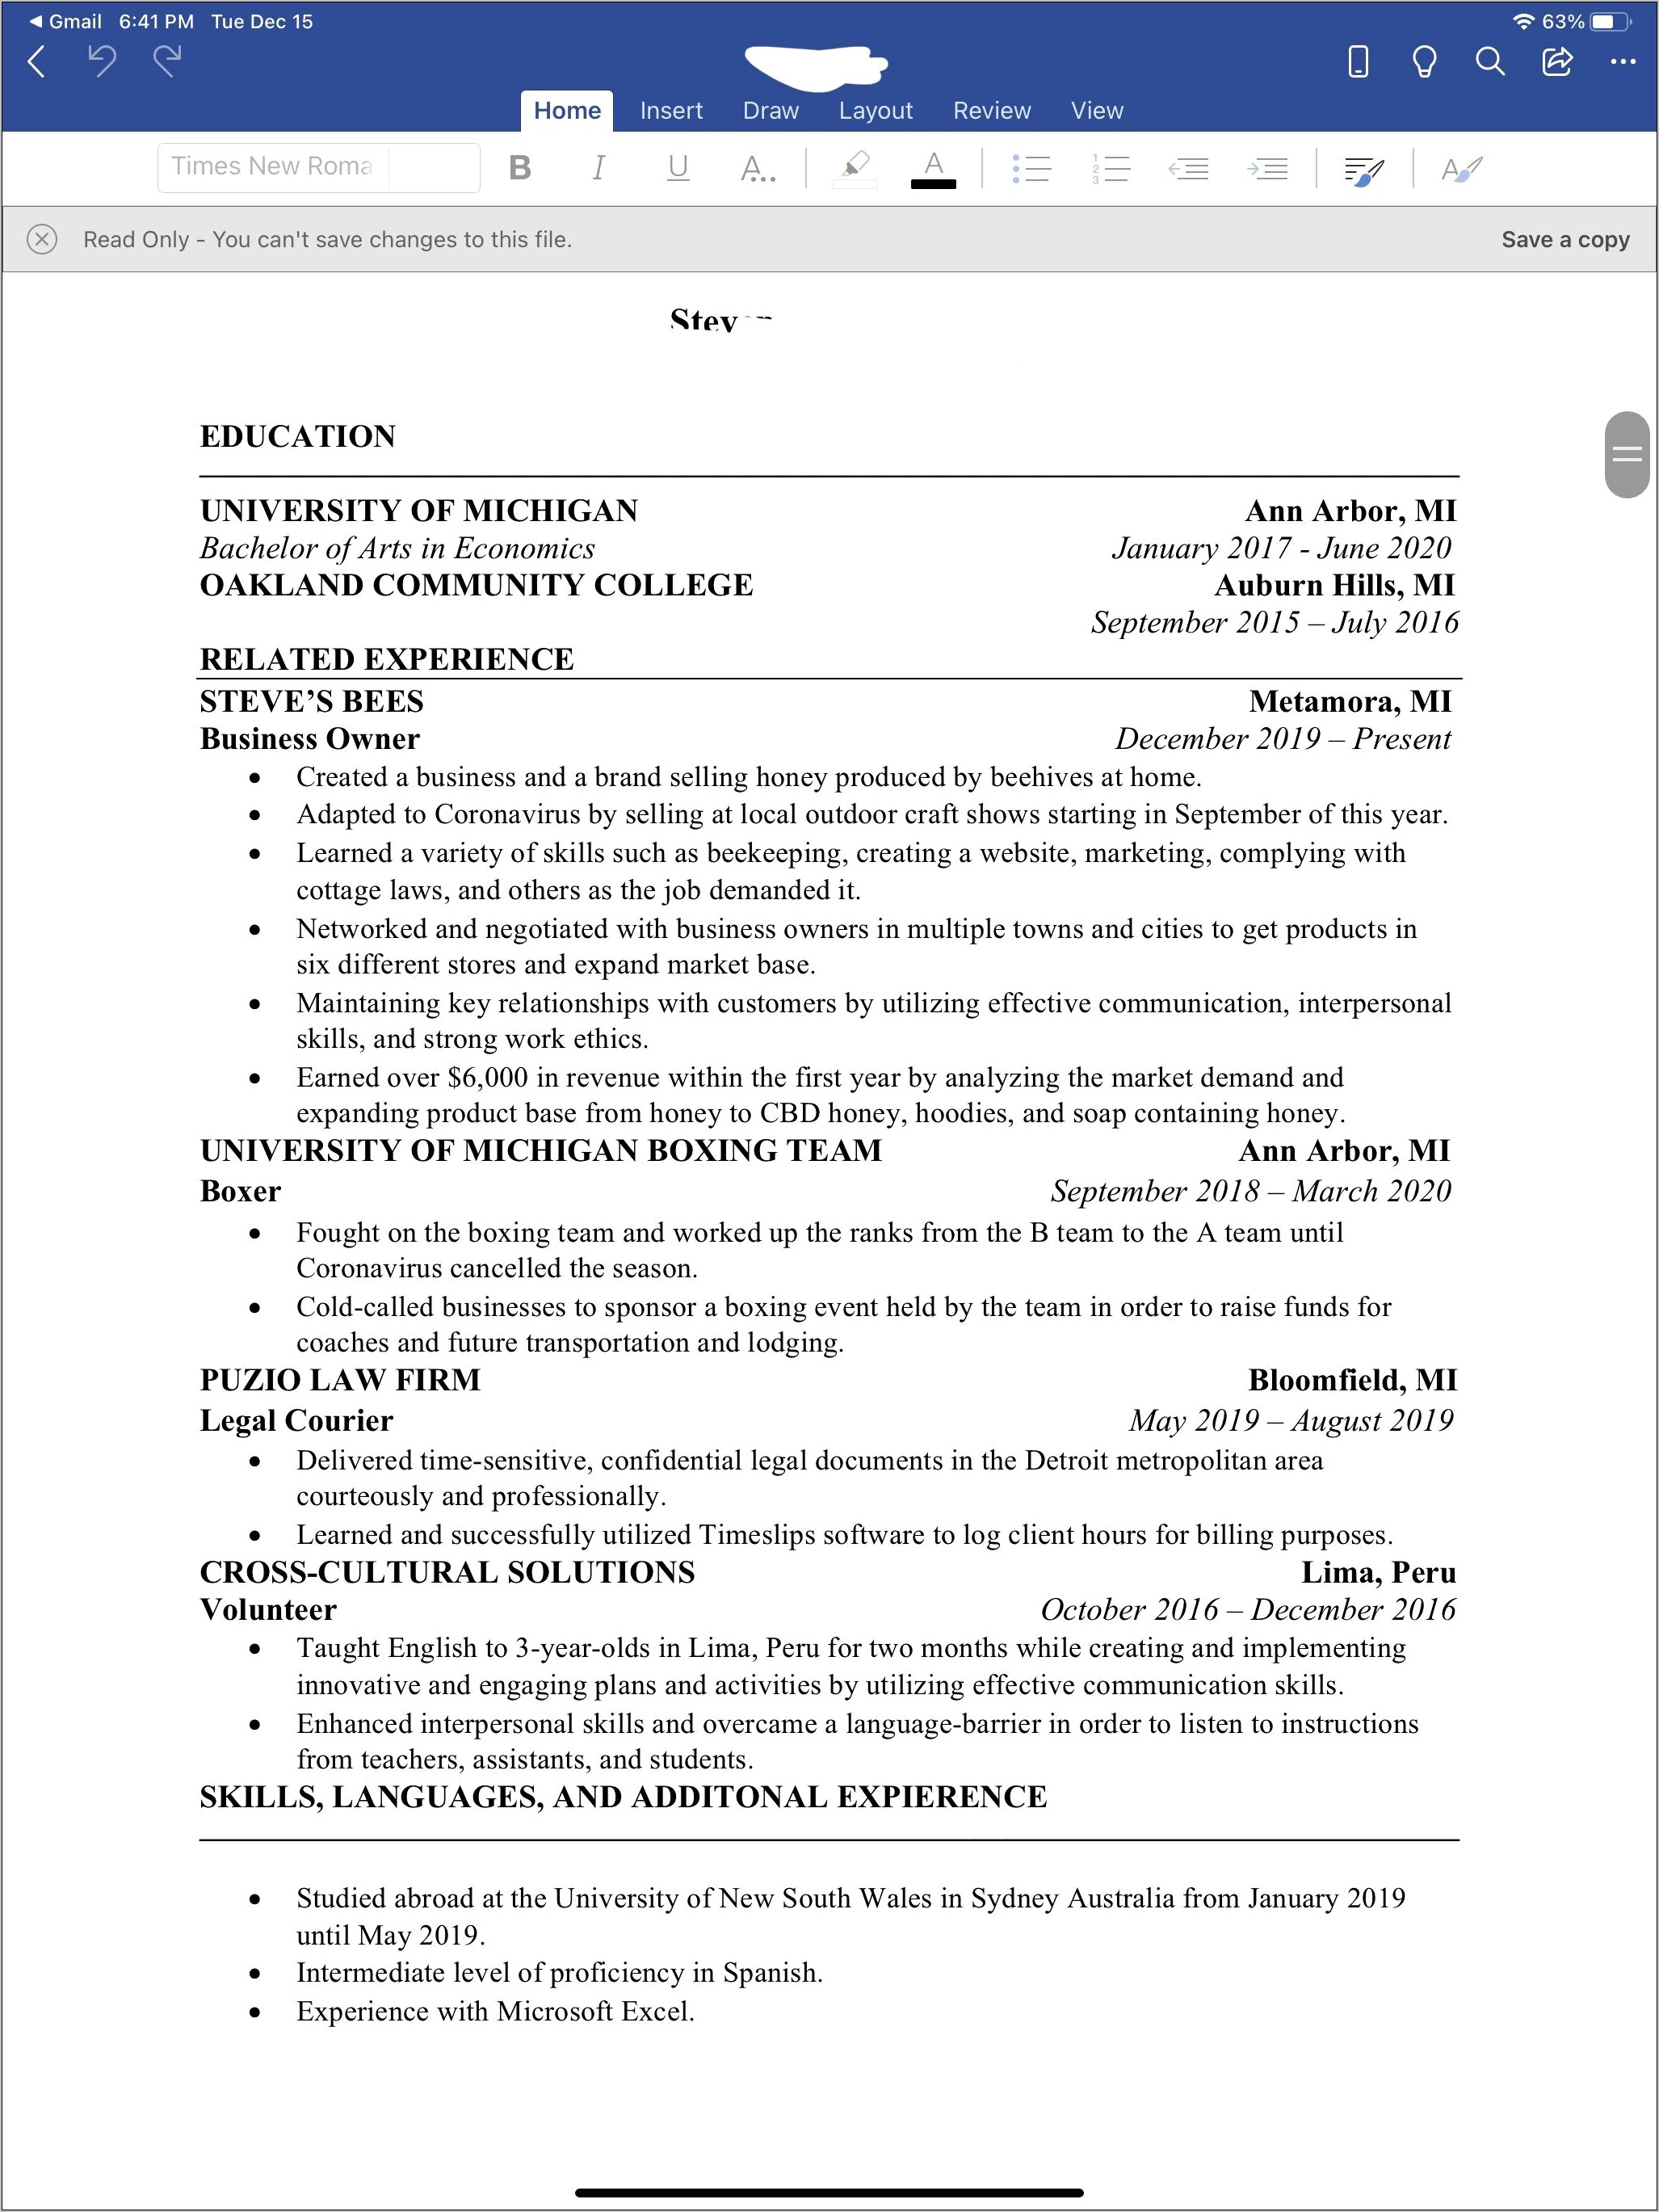 Resume Format For First Job Out Of College